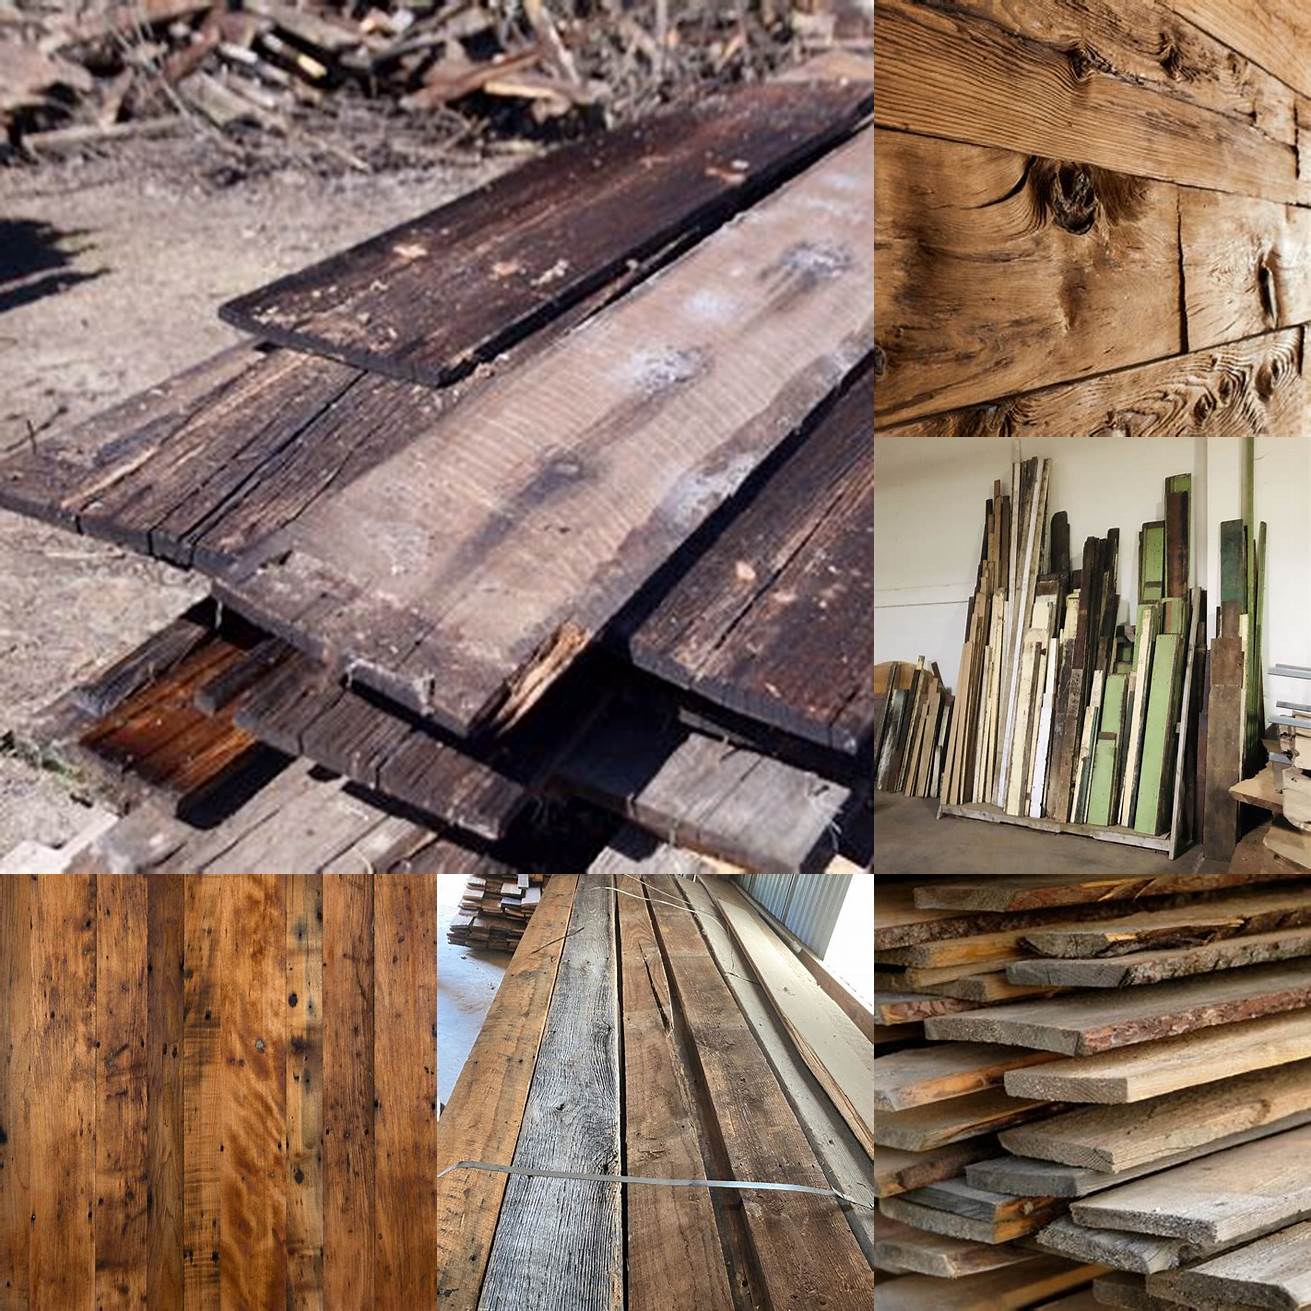 Reclaimed wood This is wood that has been salvaged from old buildings barns or other structures Reclaimed wood has a lot of character and a unique history but it can also be more expensive than other types of wood